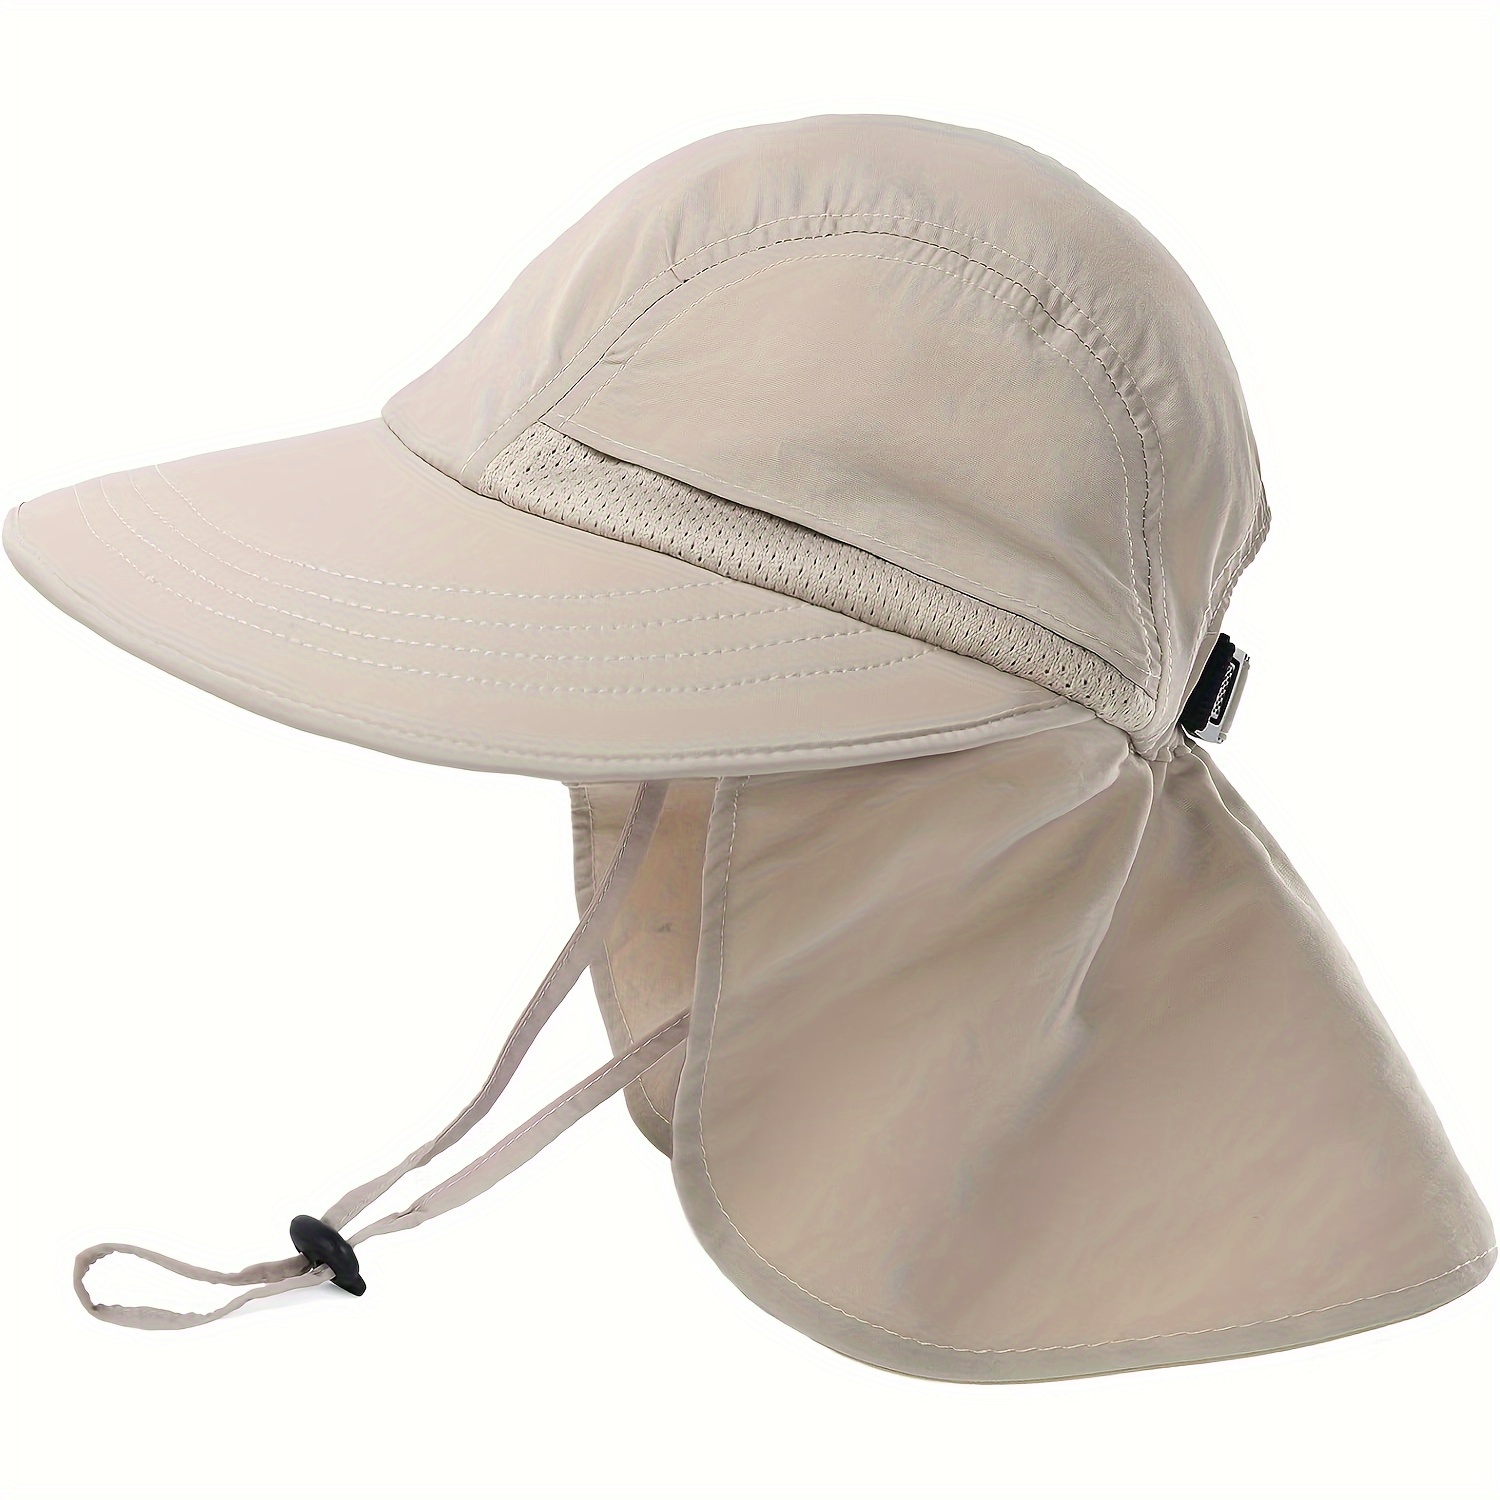 Camptrace Toddler Sun Hat for Kids Baby Beach Sun Protection UPF 50 Boys Girls Fishing Hats (01-grey 2-5t)